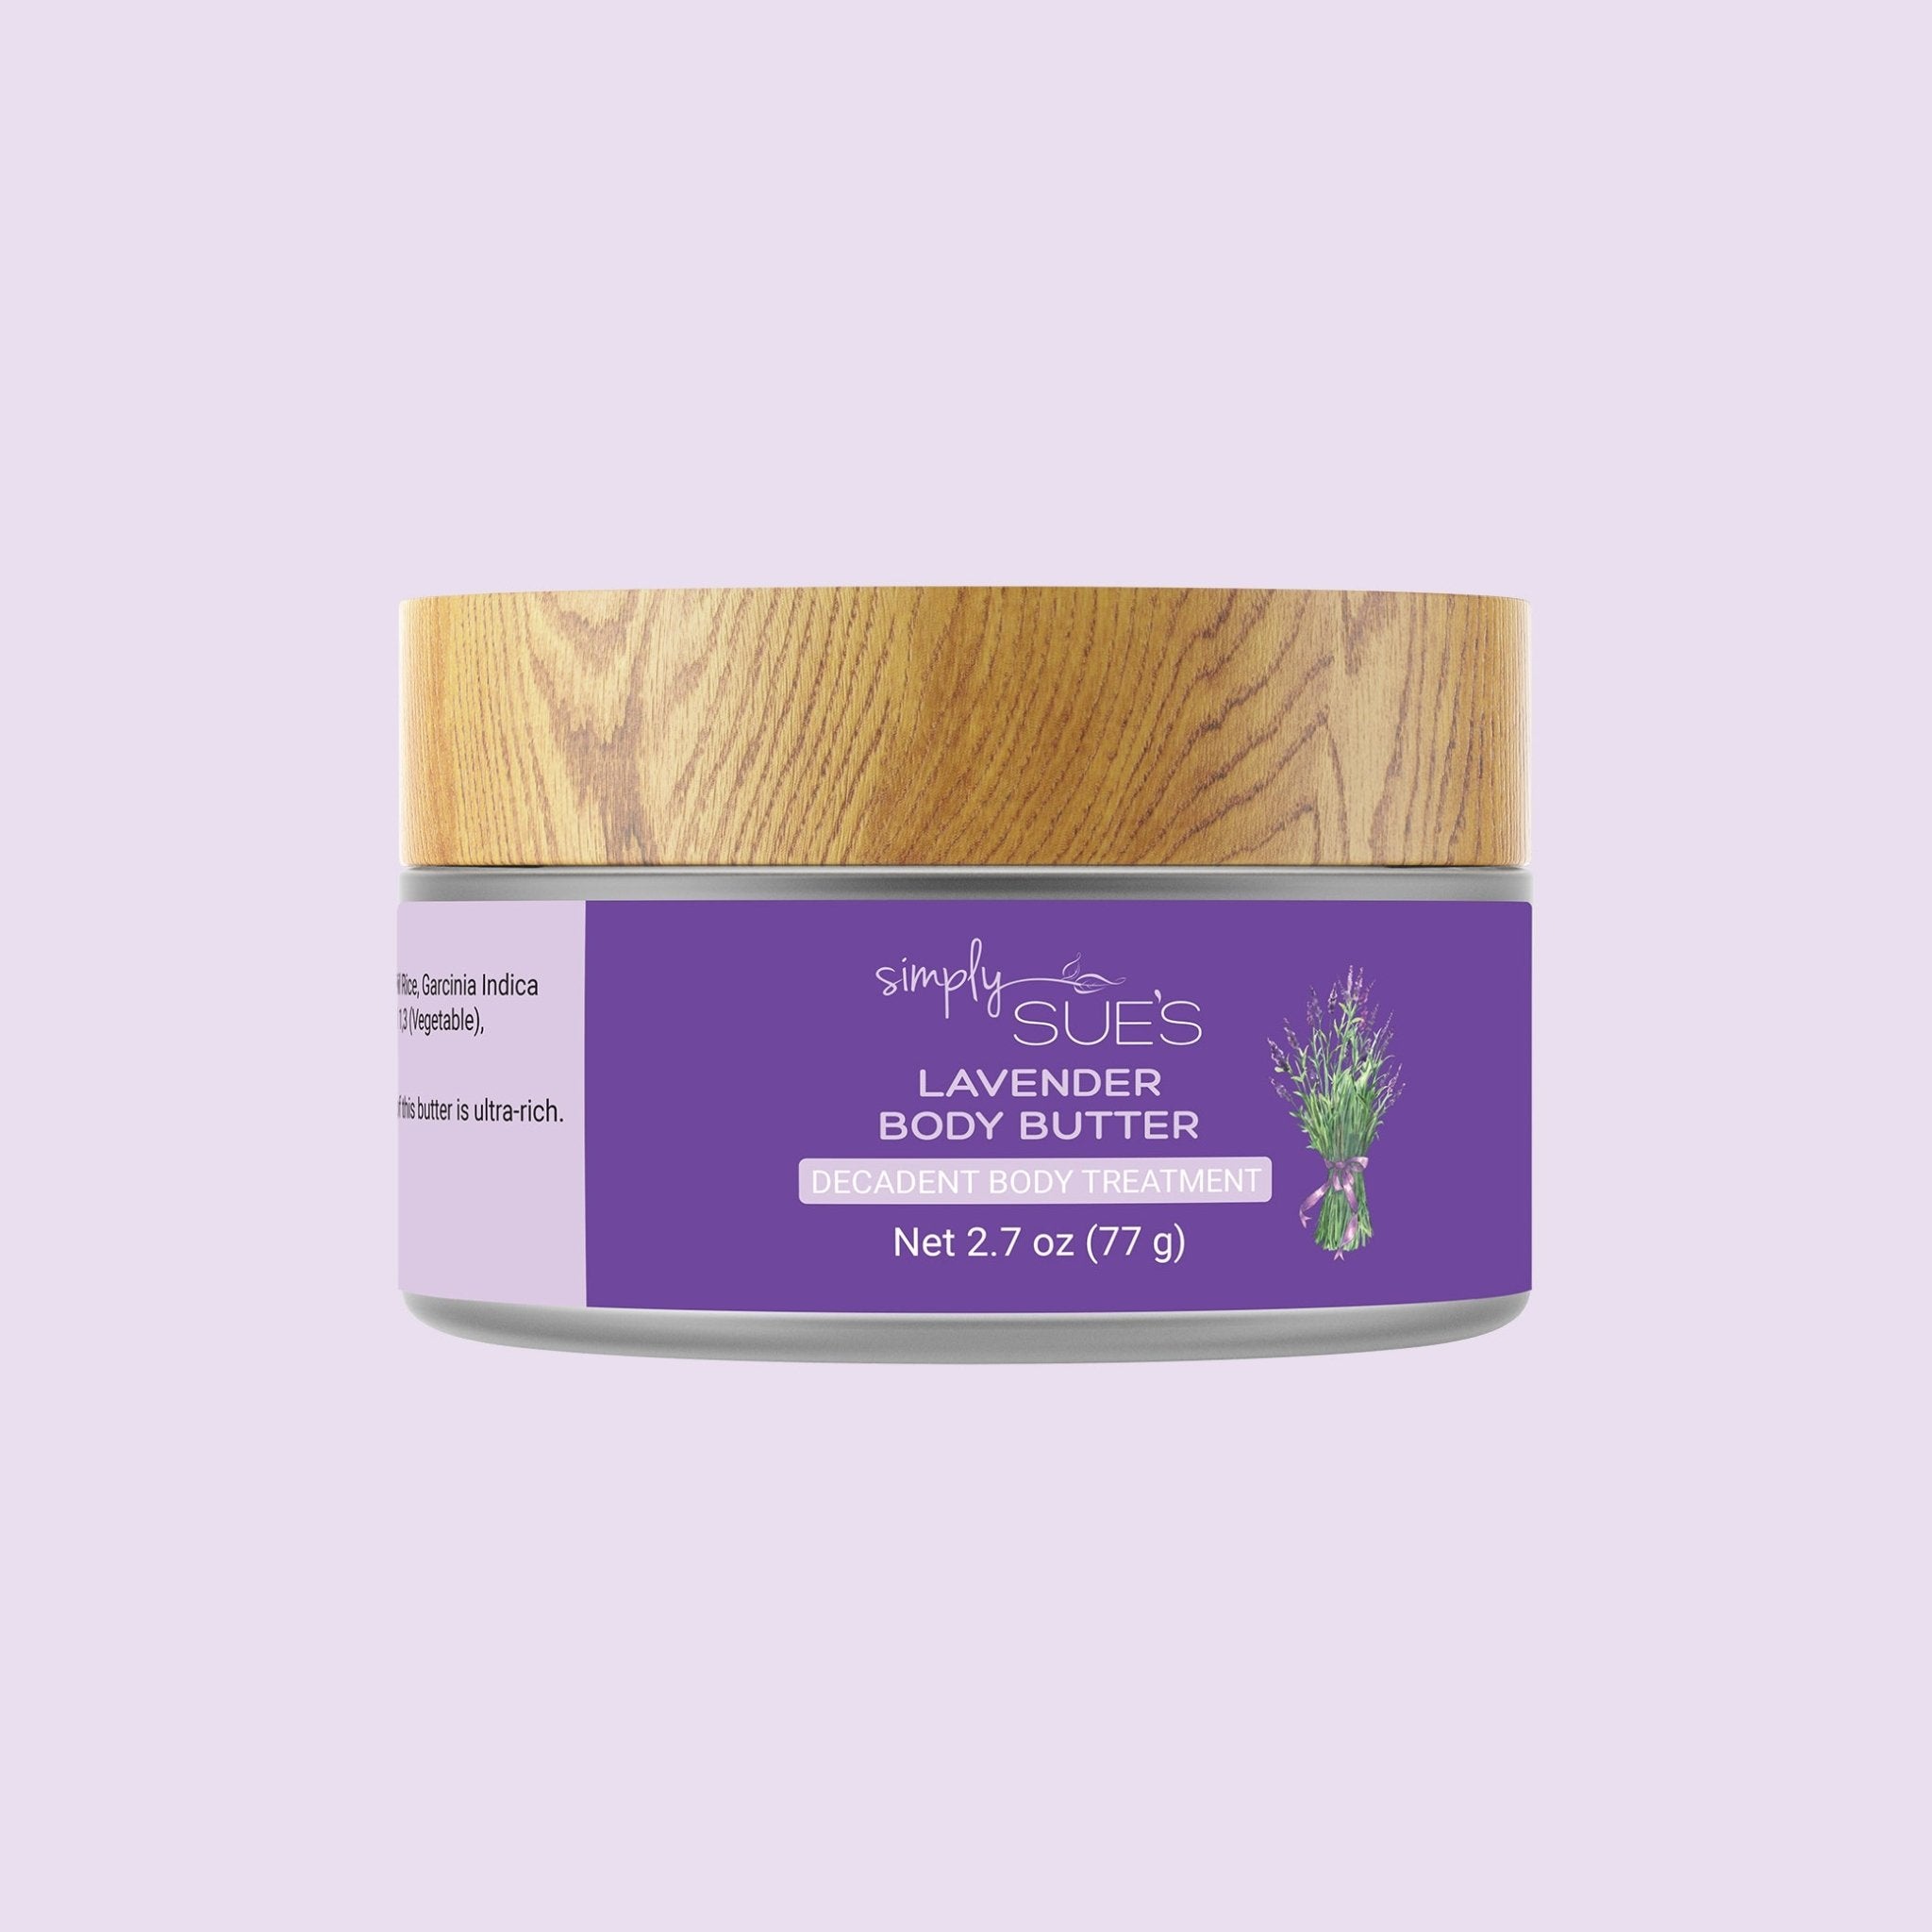 Synthetic fragrance free natural body butter  elegantly packaged in a recyclable glass jar with a bamboo cap from Simply Sue&